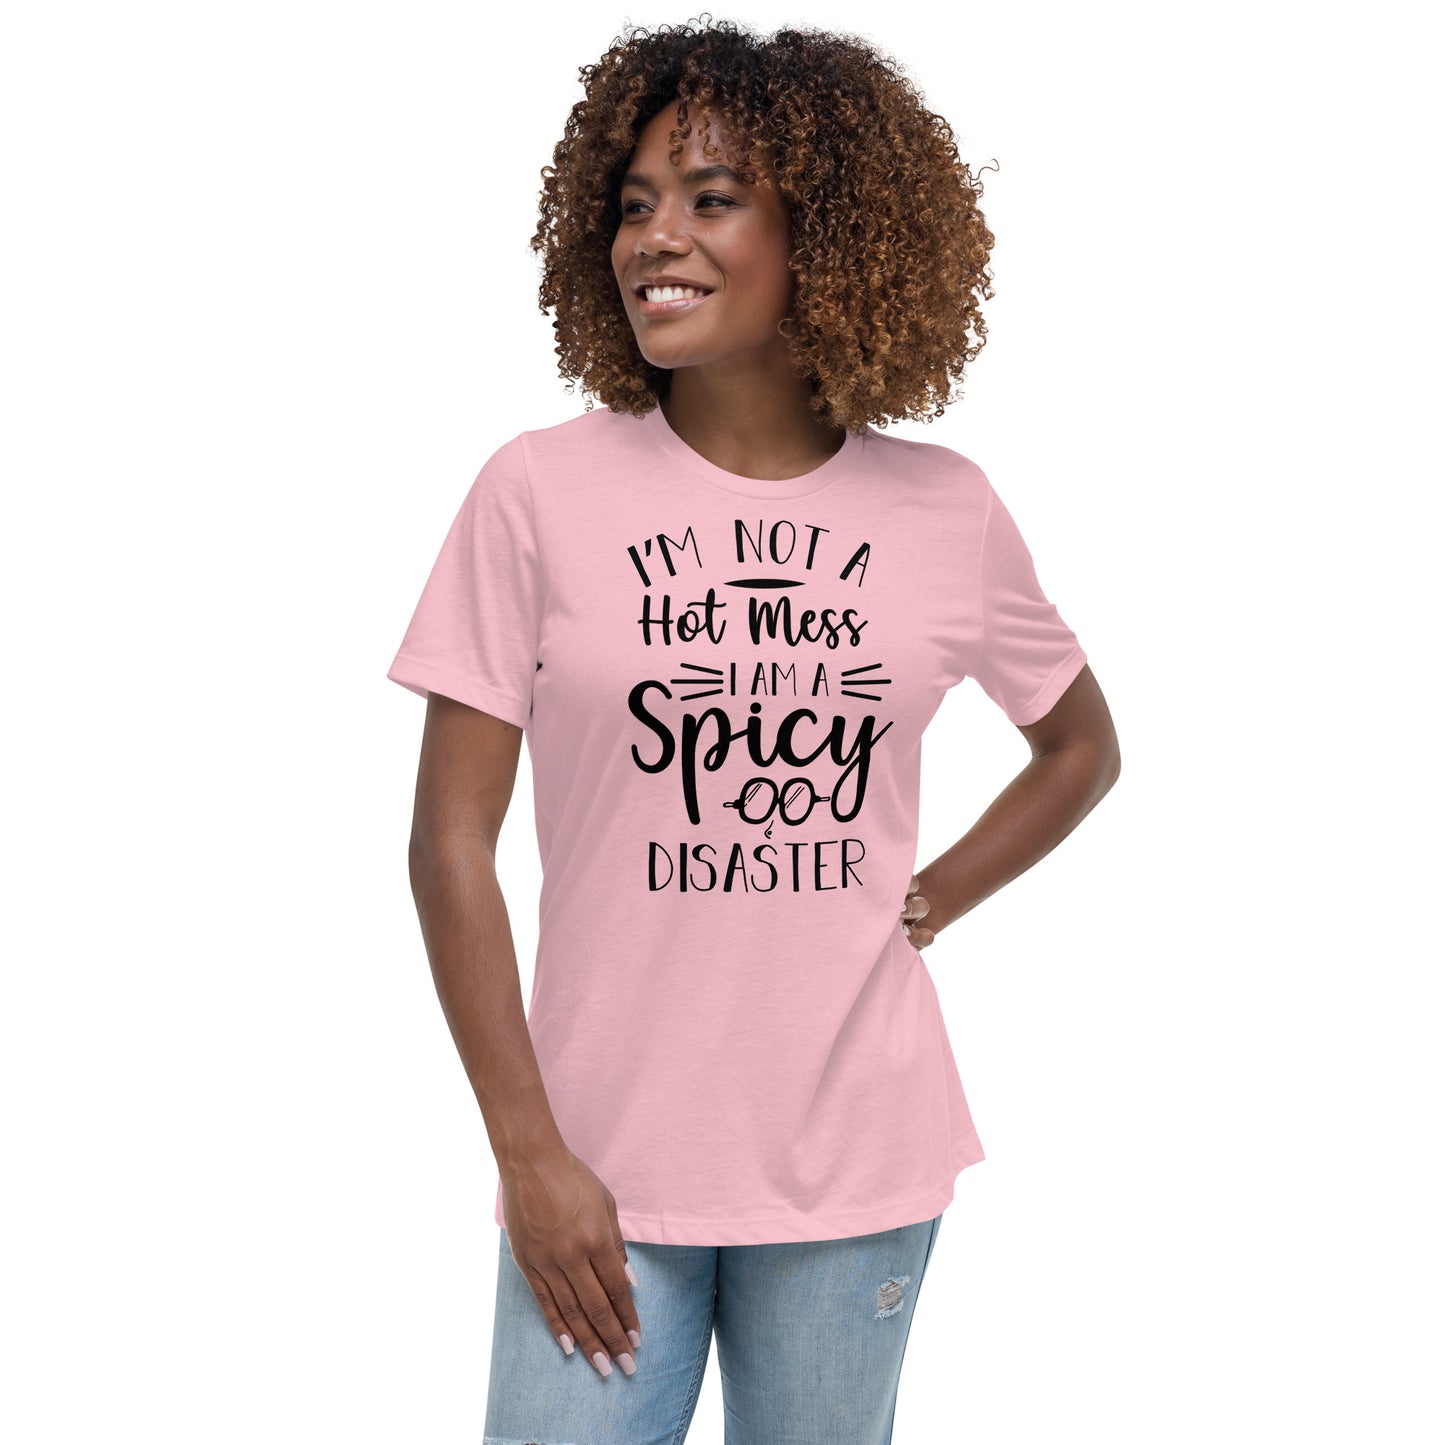 I'm Not a Hot Mess I'm a Spicy Disaster Women's Relaxed T-Shirt